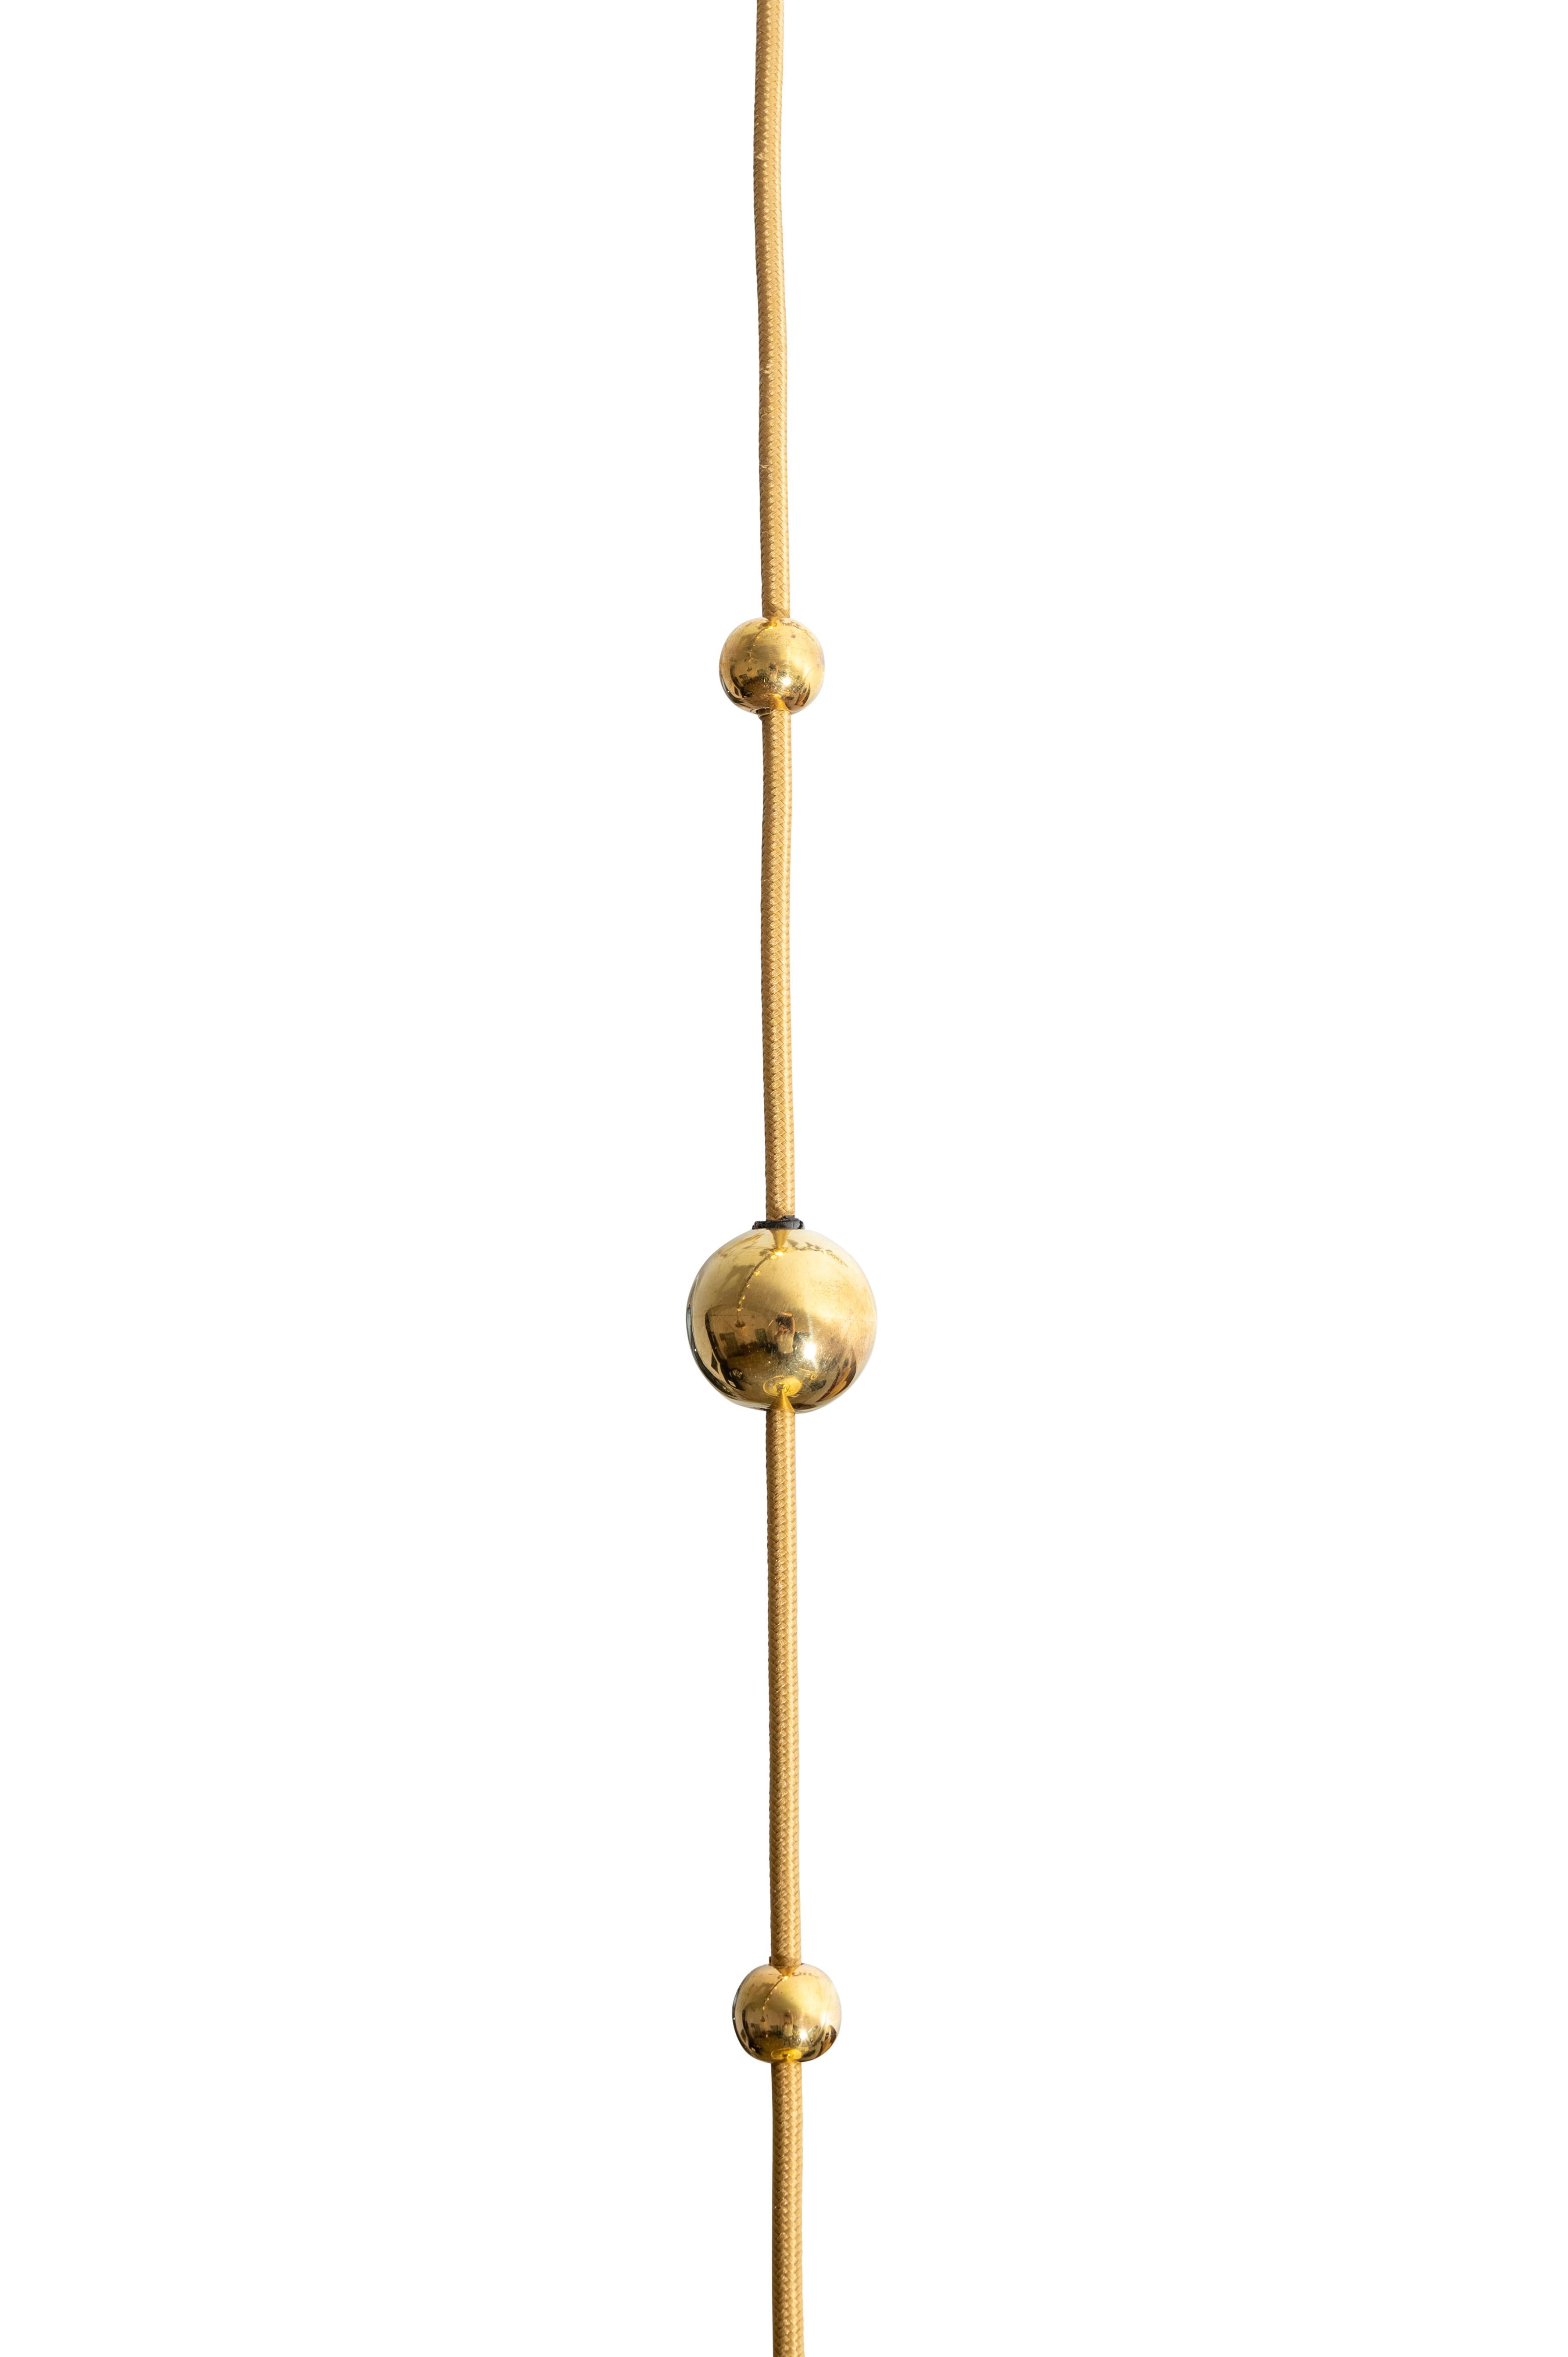 Polished Vienna 1900 Brass Ceiling Lamp with Loetz Glass Shades by Koloman Moser For Sale